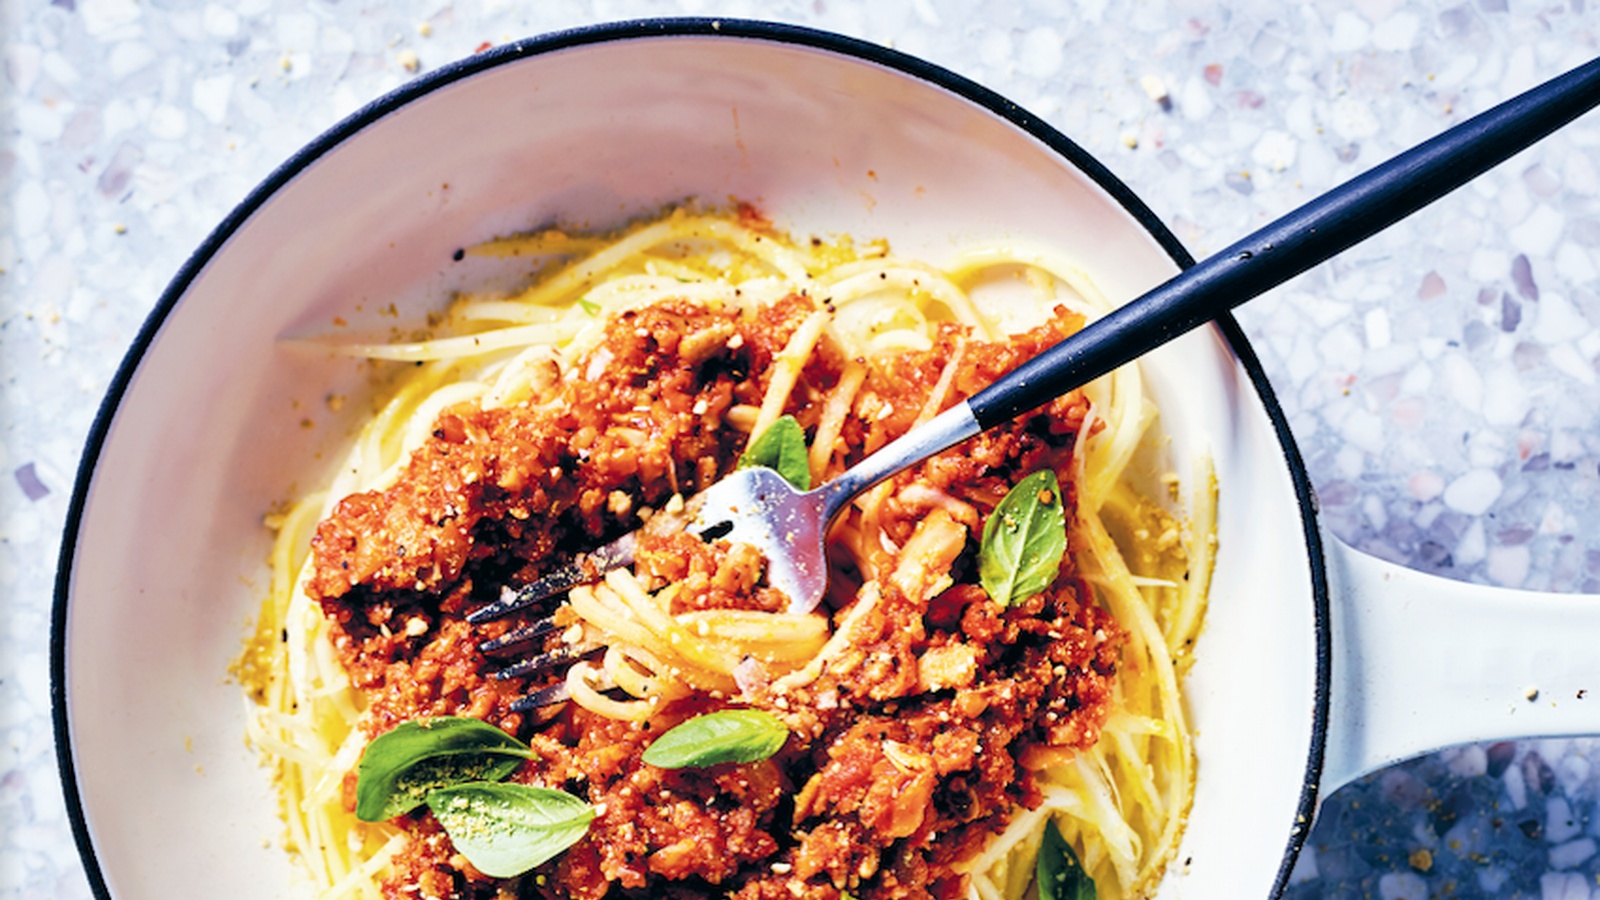 Parsnip Spaghetti with Sunflower Bolognese